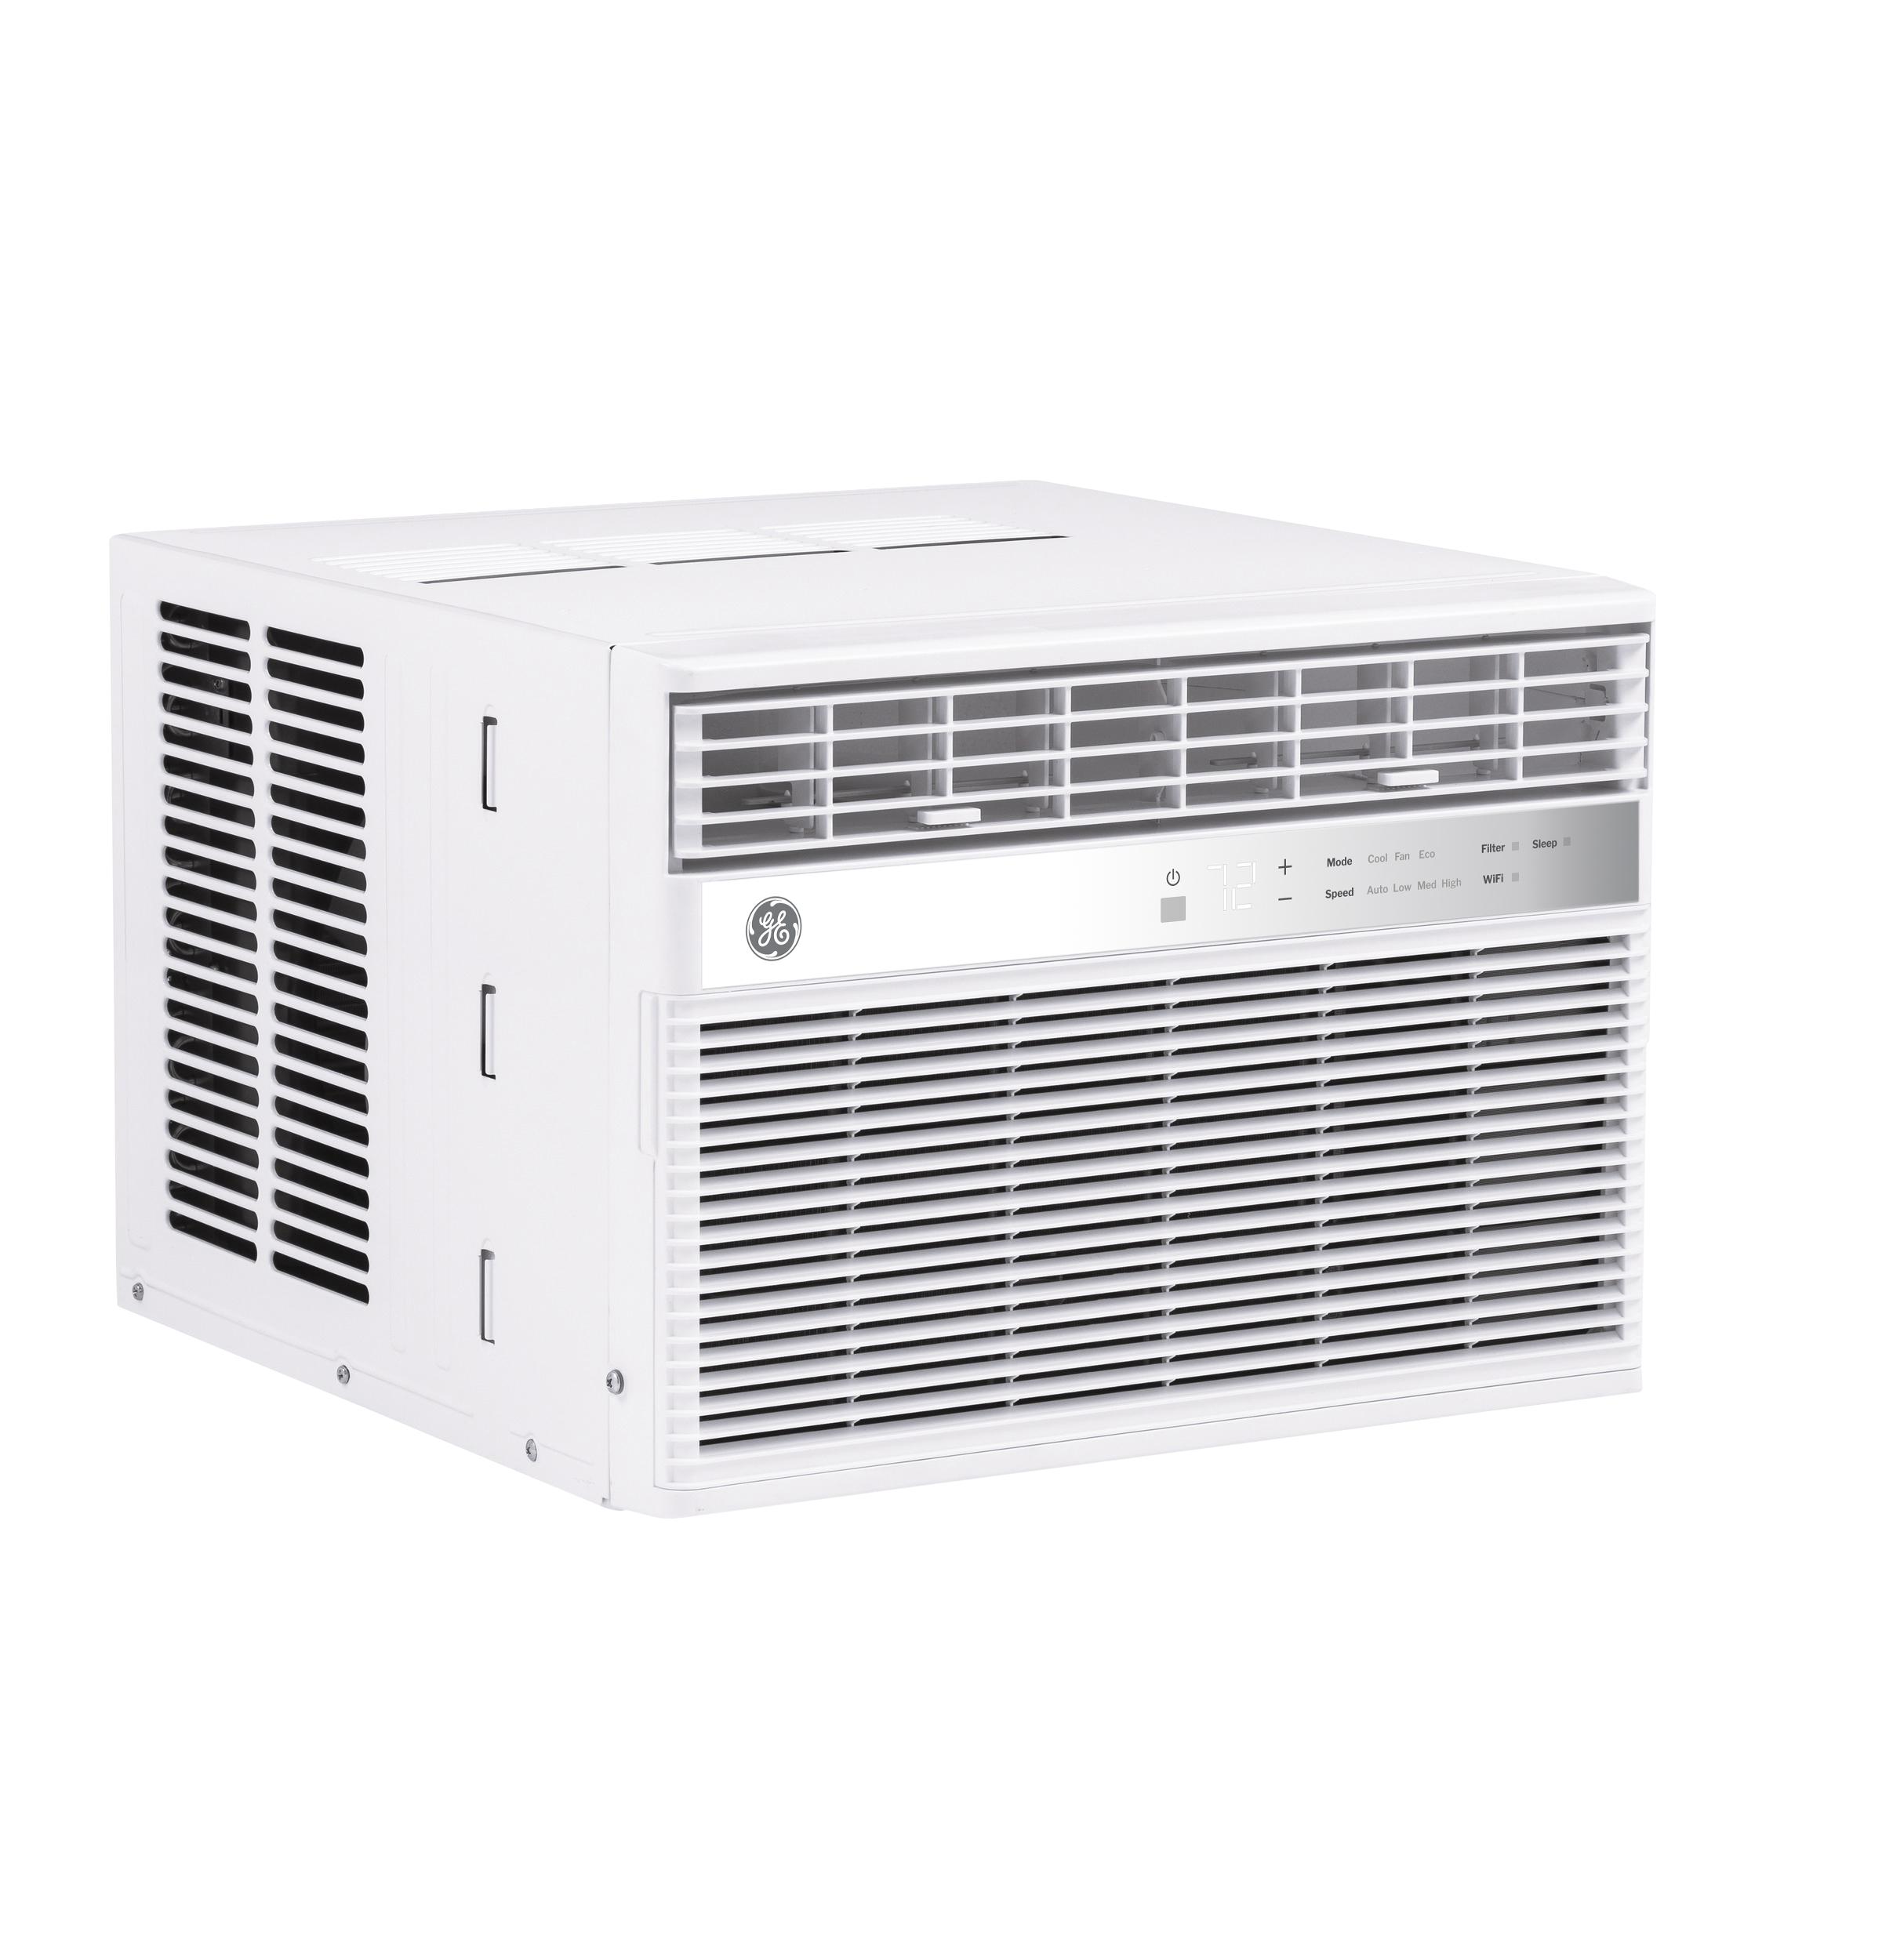 Ge Appliances AWES10WWF Ge® 10,000 Btu Smart Electronic Window Air Conditioner For Medium Rooms Up To 450 Sq. Ft.